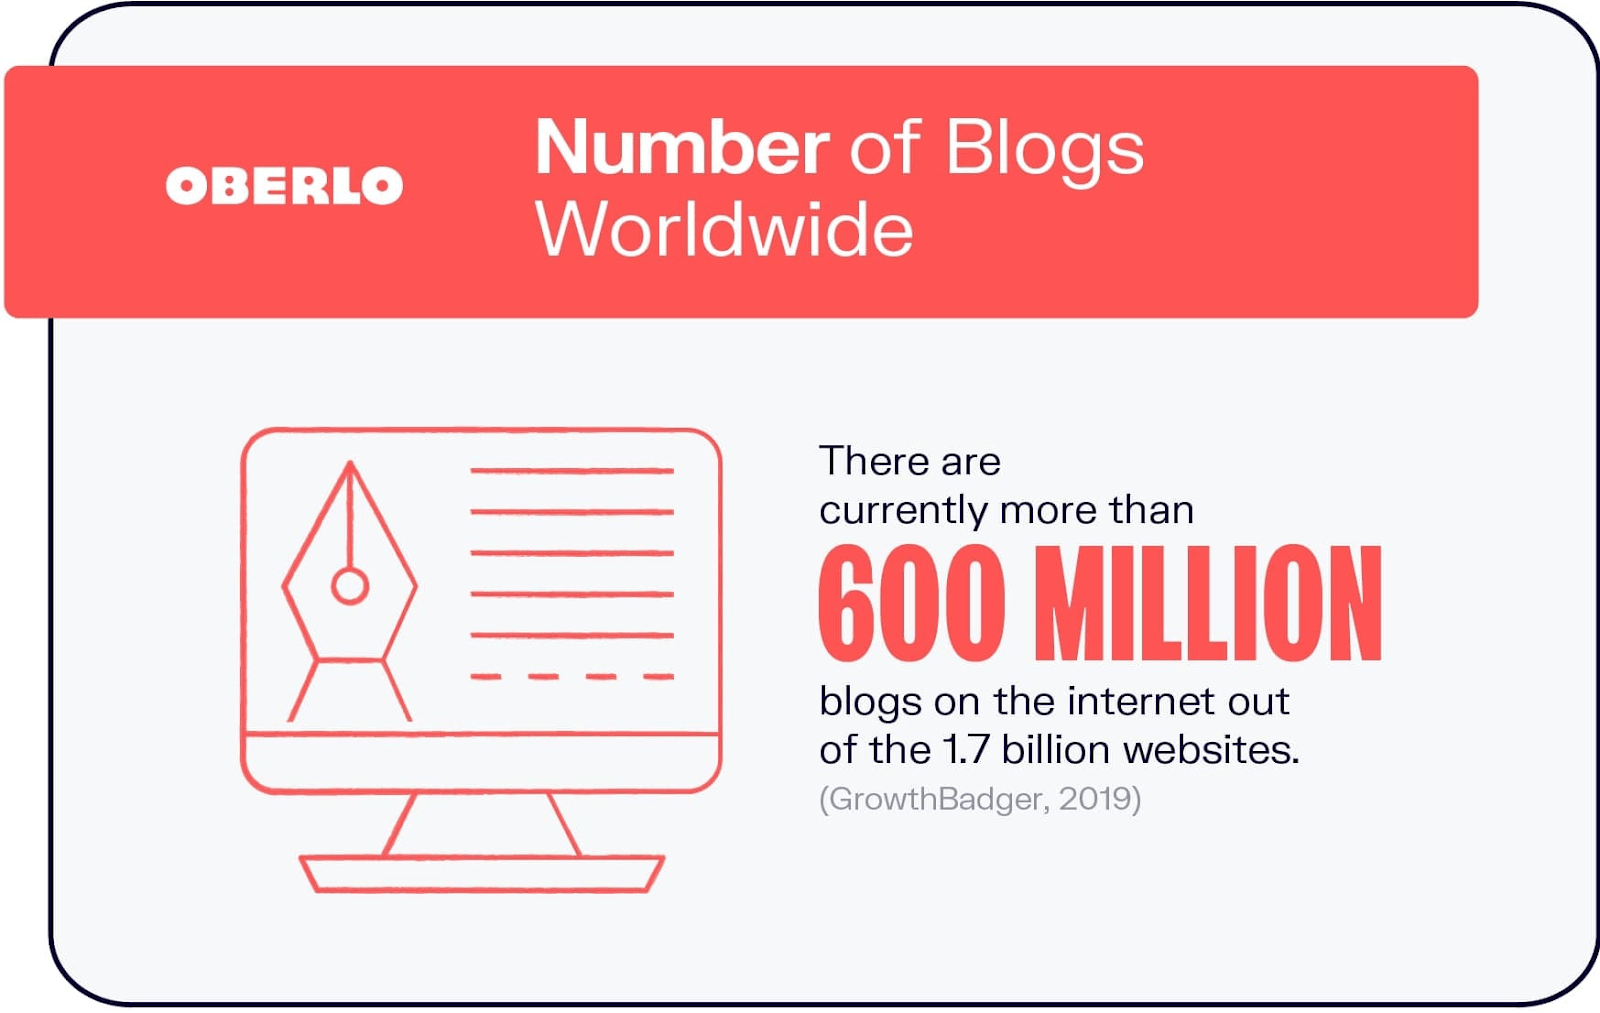 numbers of blogs statistics by oberlo